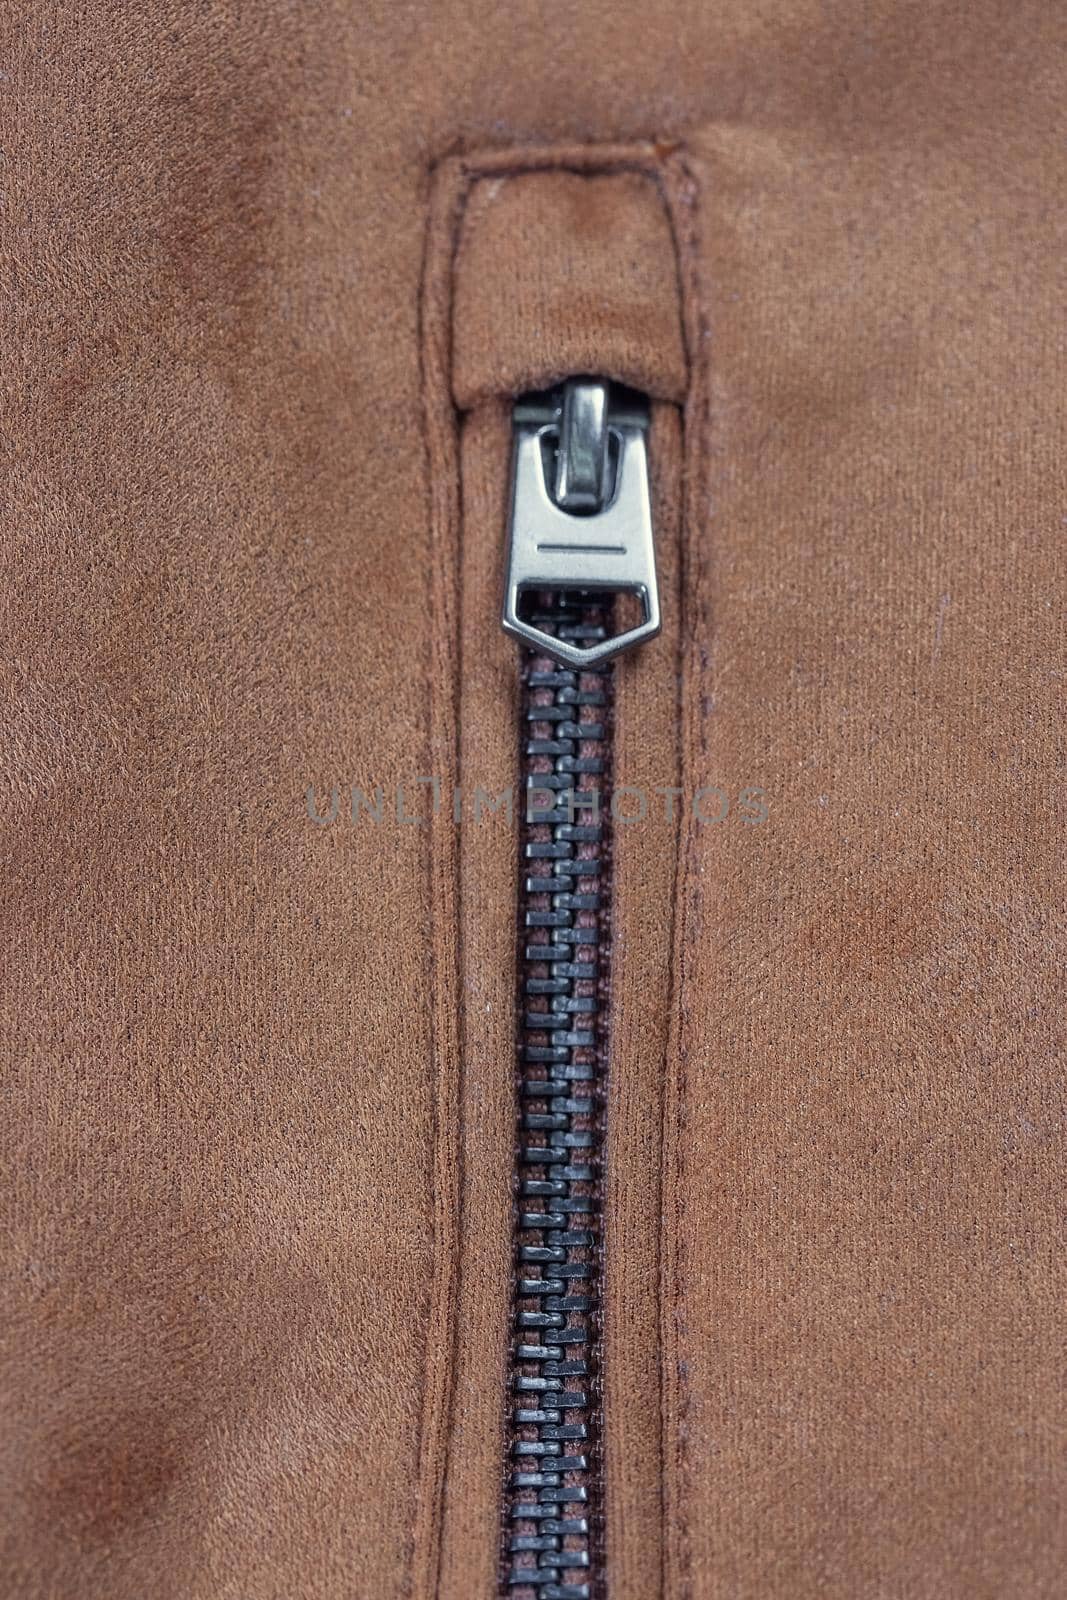 Close-up of a zippered pocket on a faux suede jacket by galinasharapova